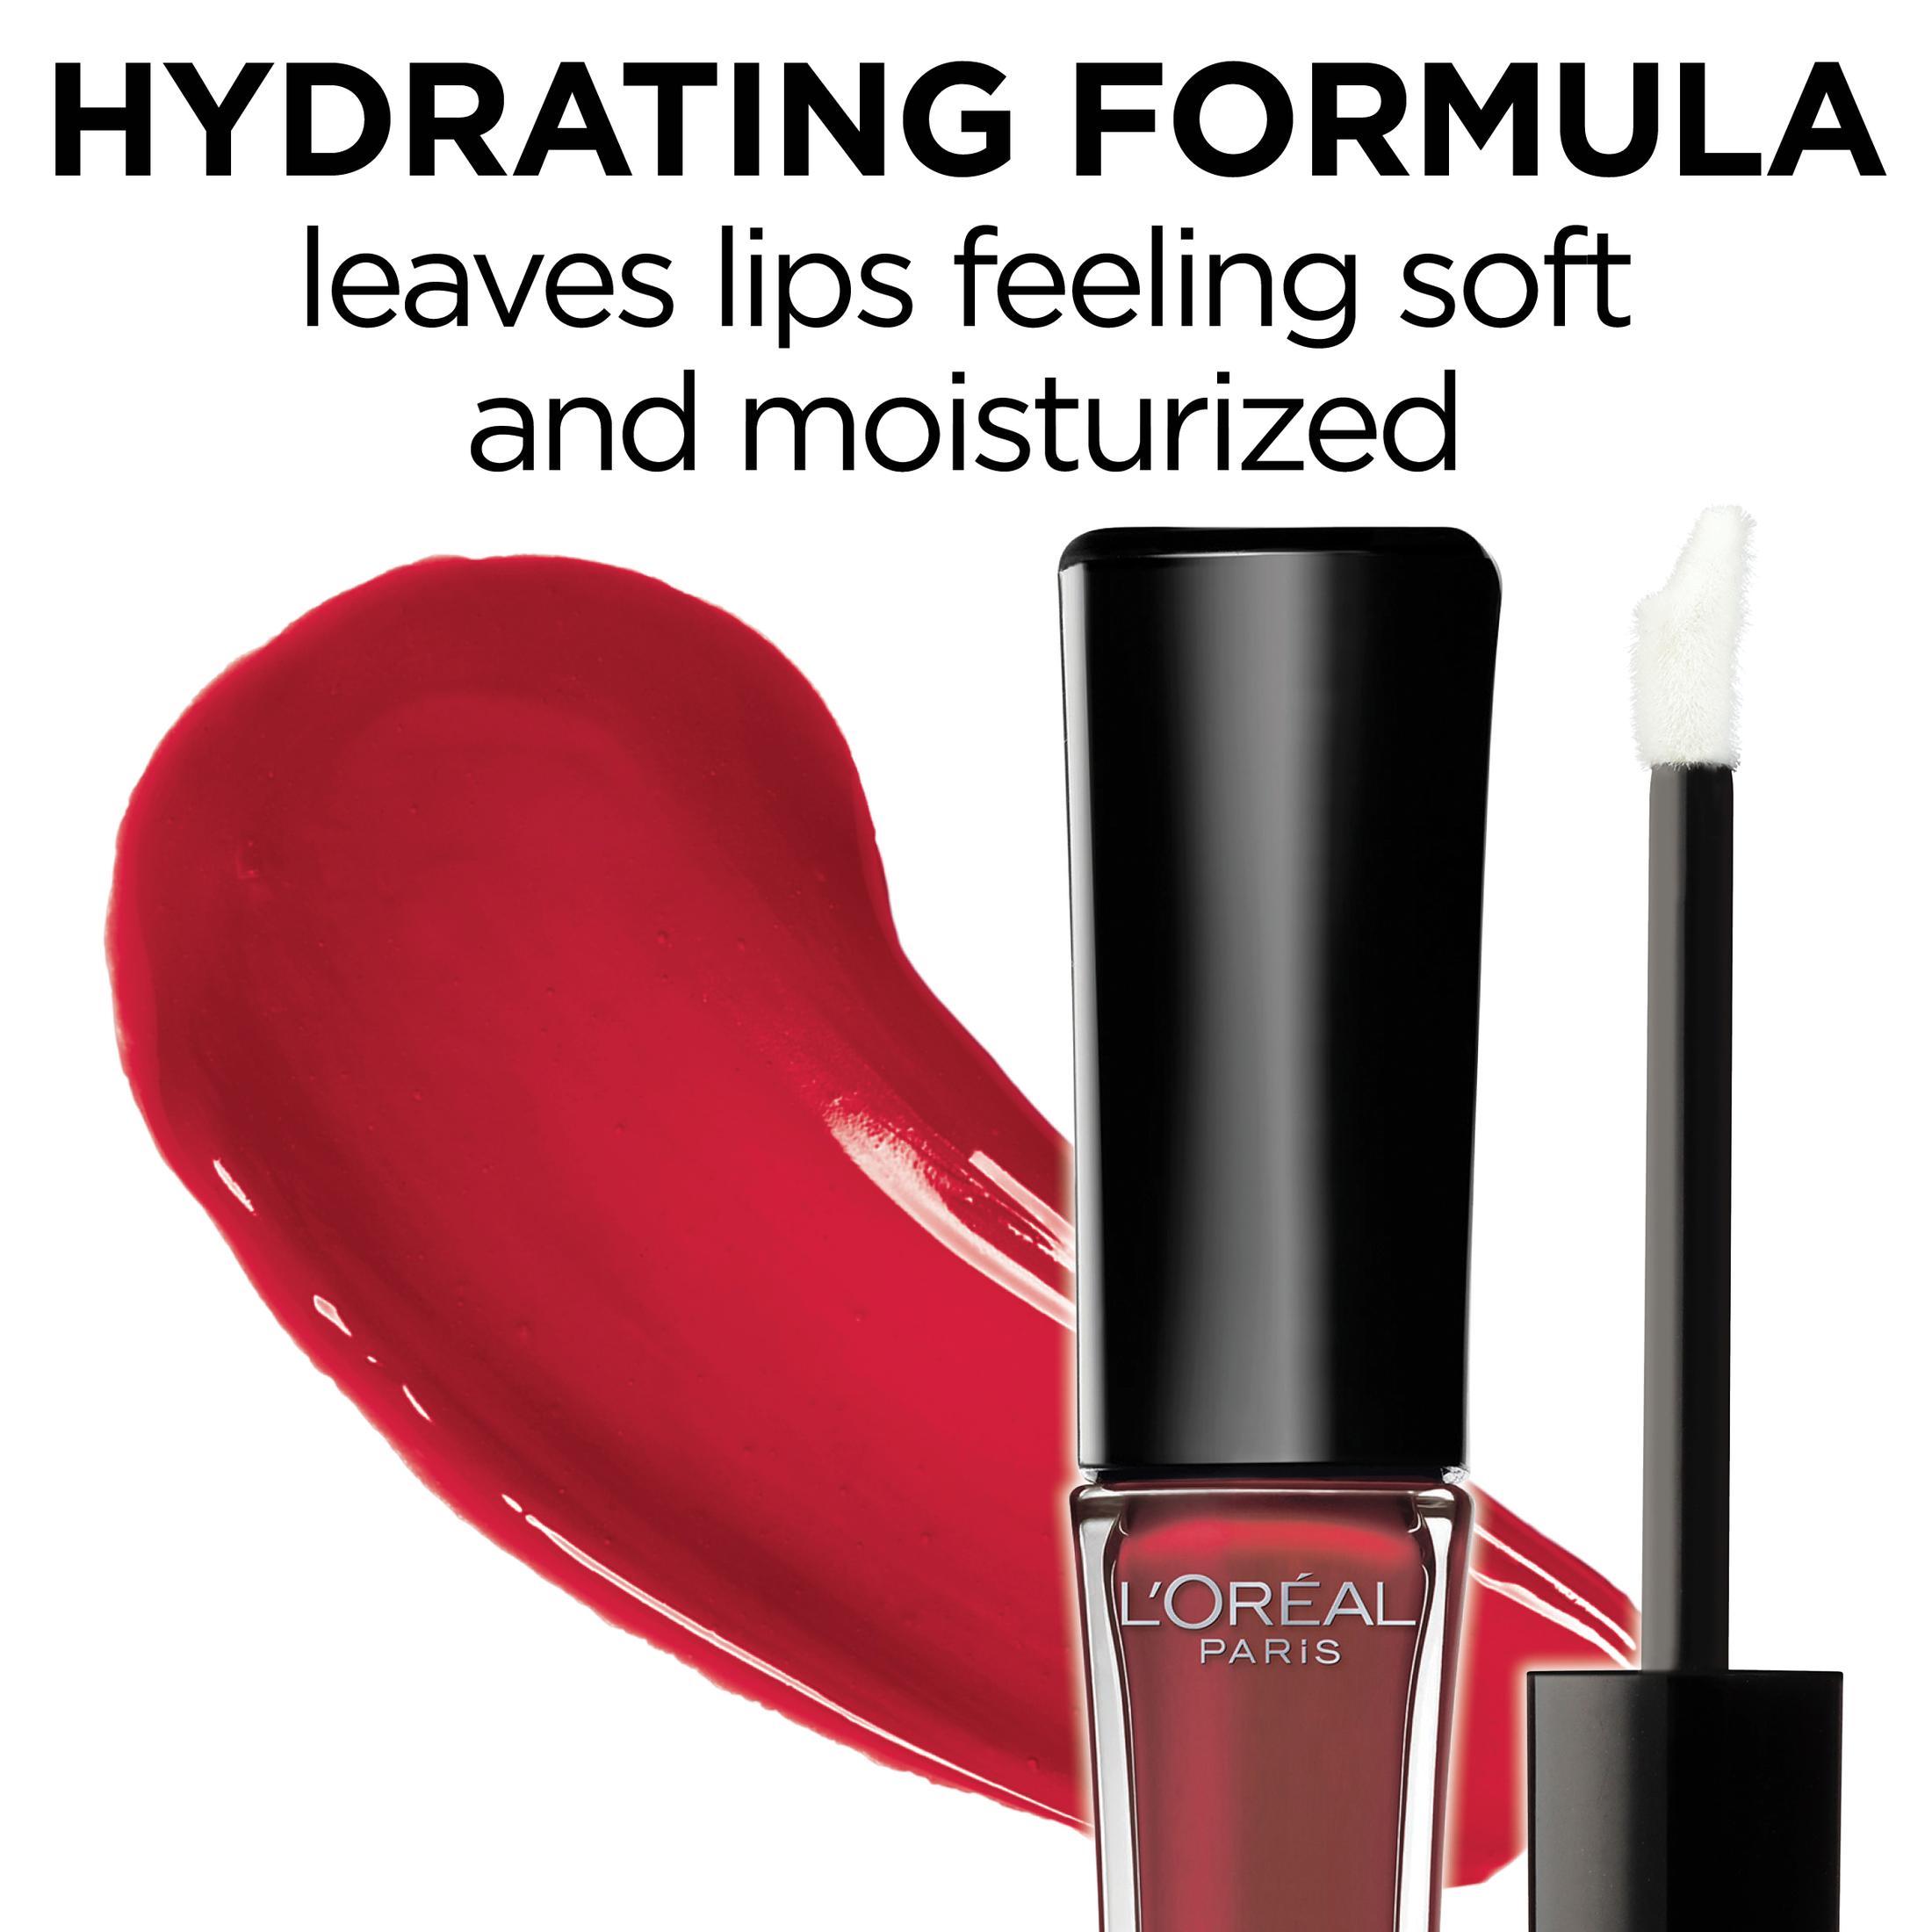 L'Oreal Paris Infallible 8 Hour Pro Hydrating Lip Gloss, Sangria - image 4 of 5